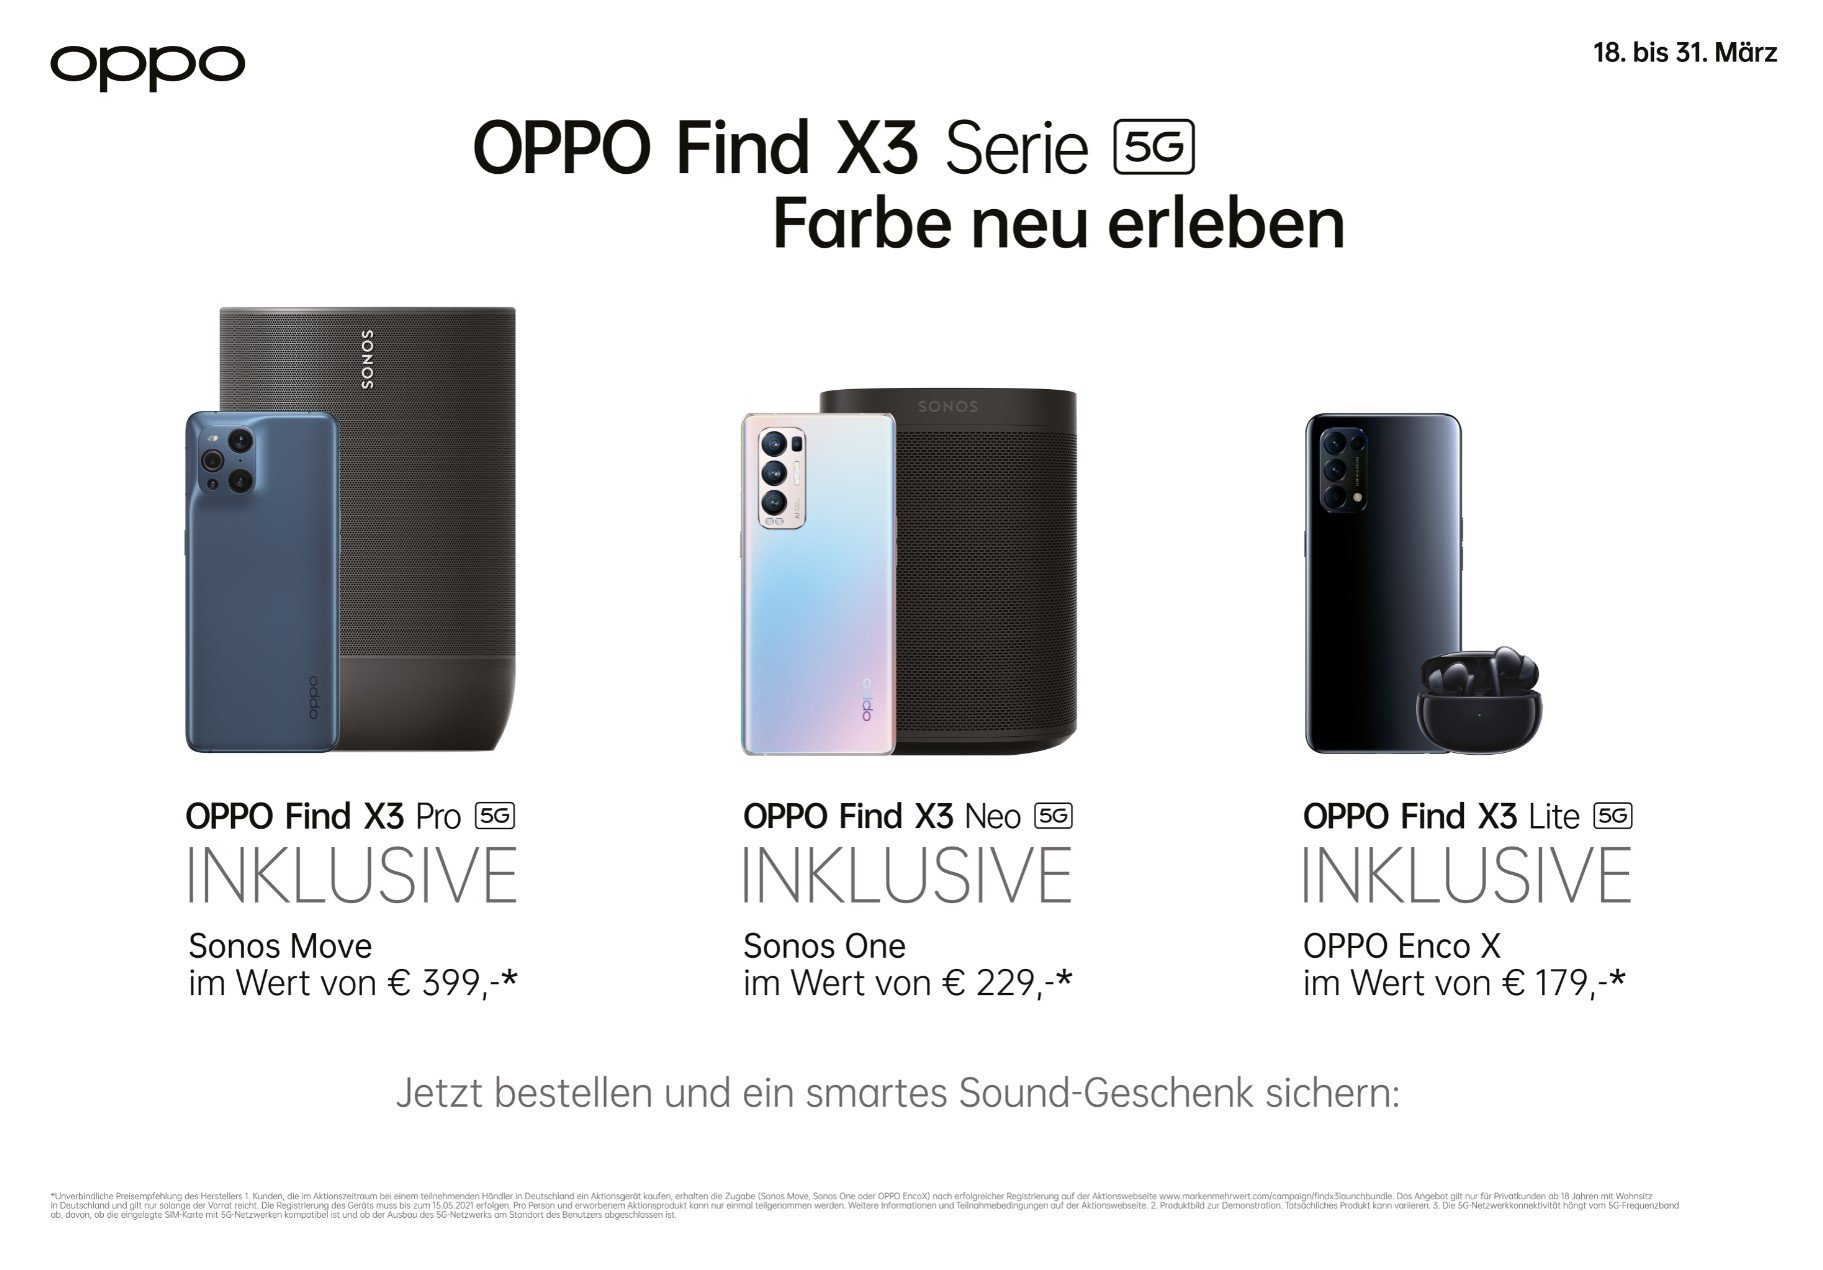 OPPO Find X3 series bundle promotion